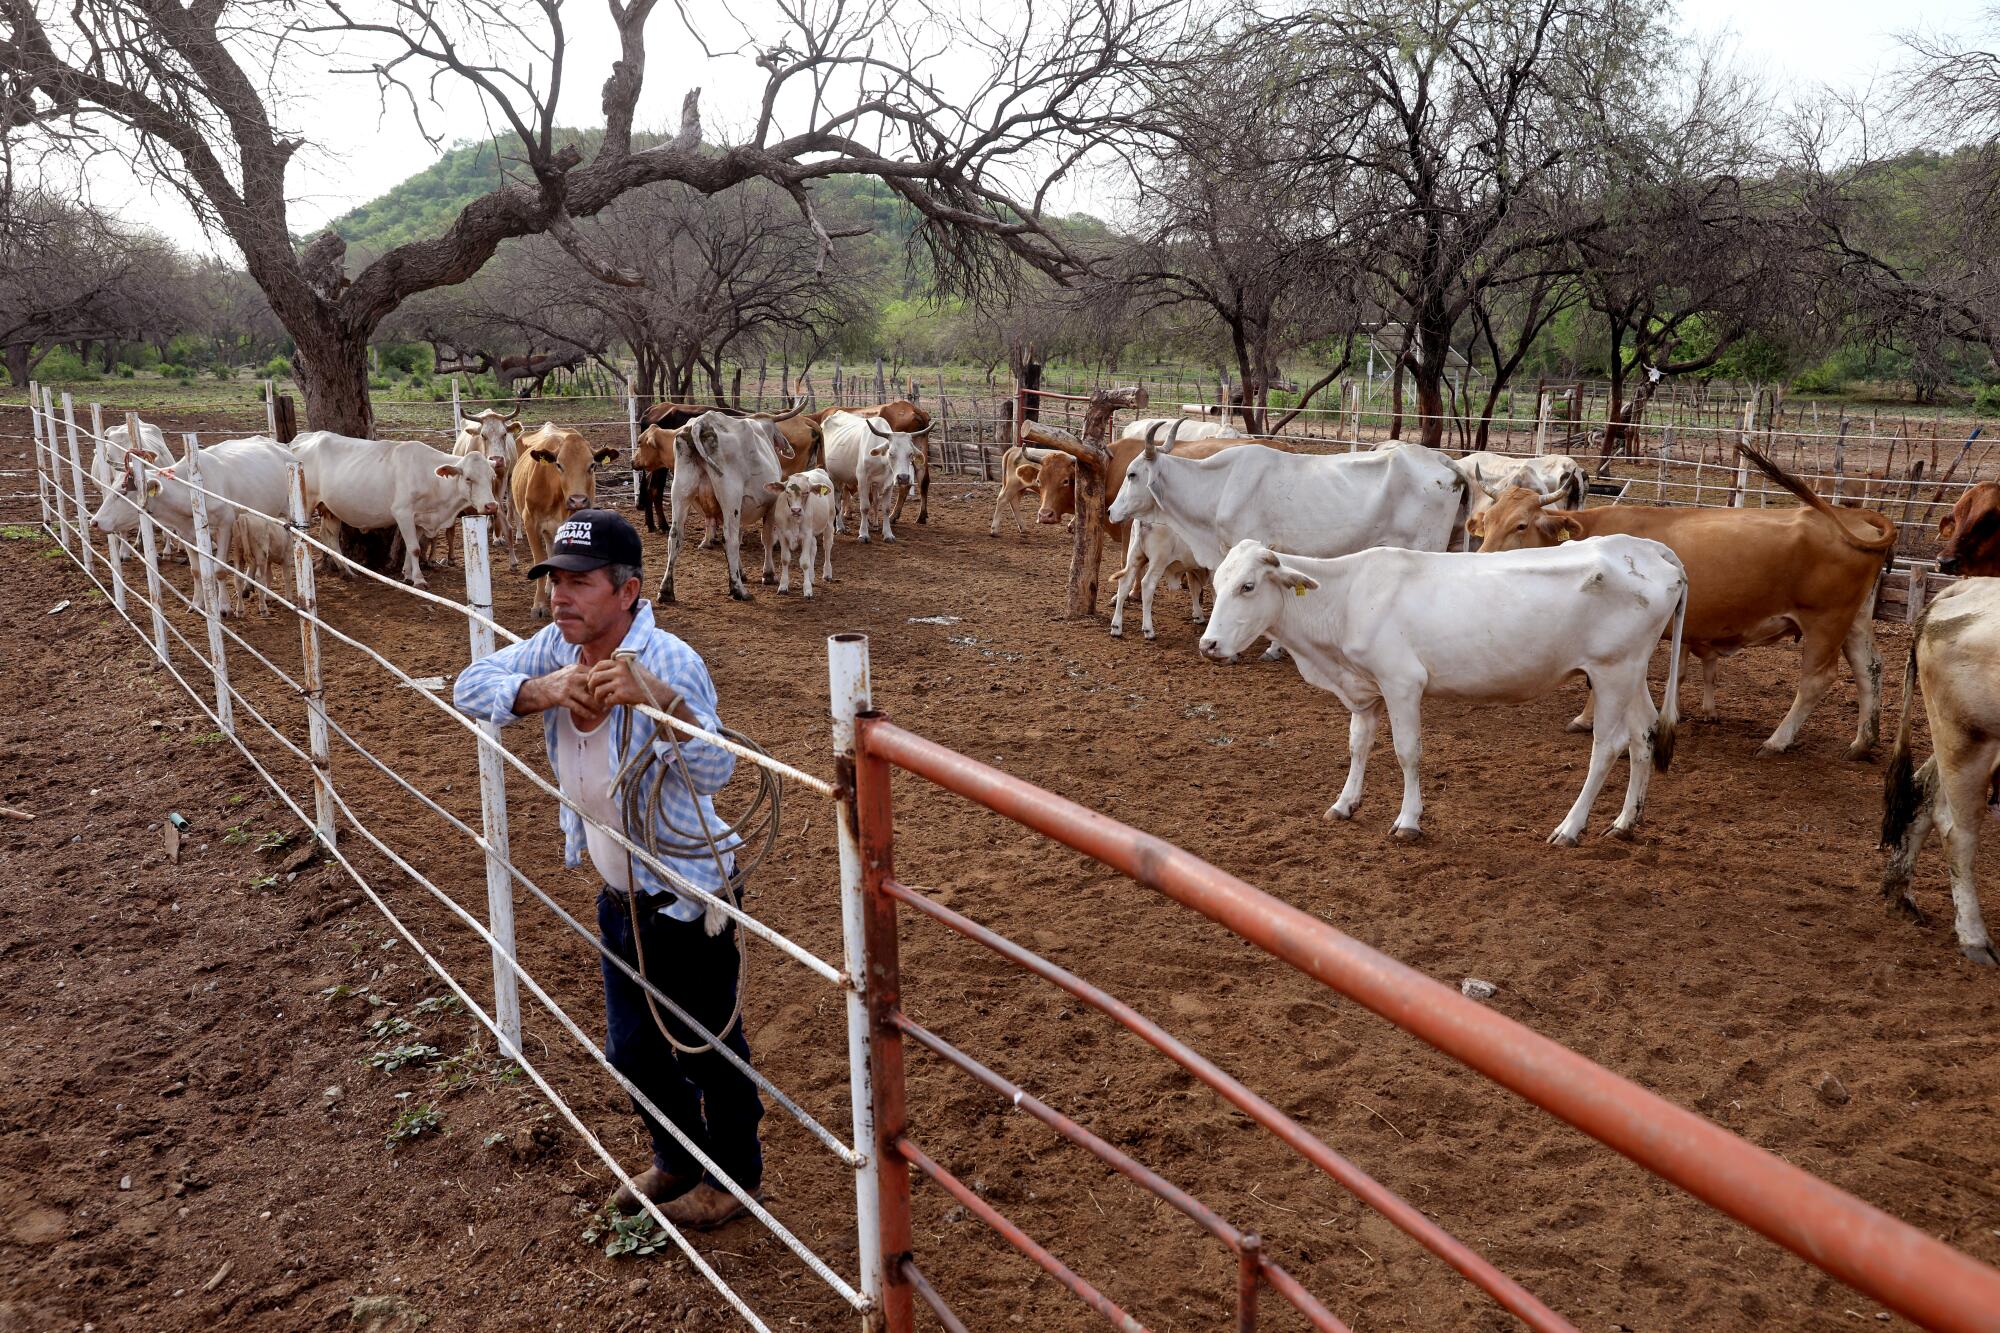  A ranch hand stands at a fence among cattle